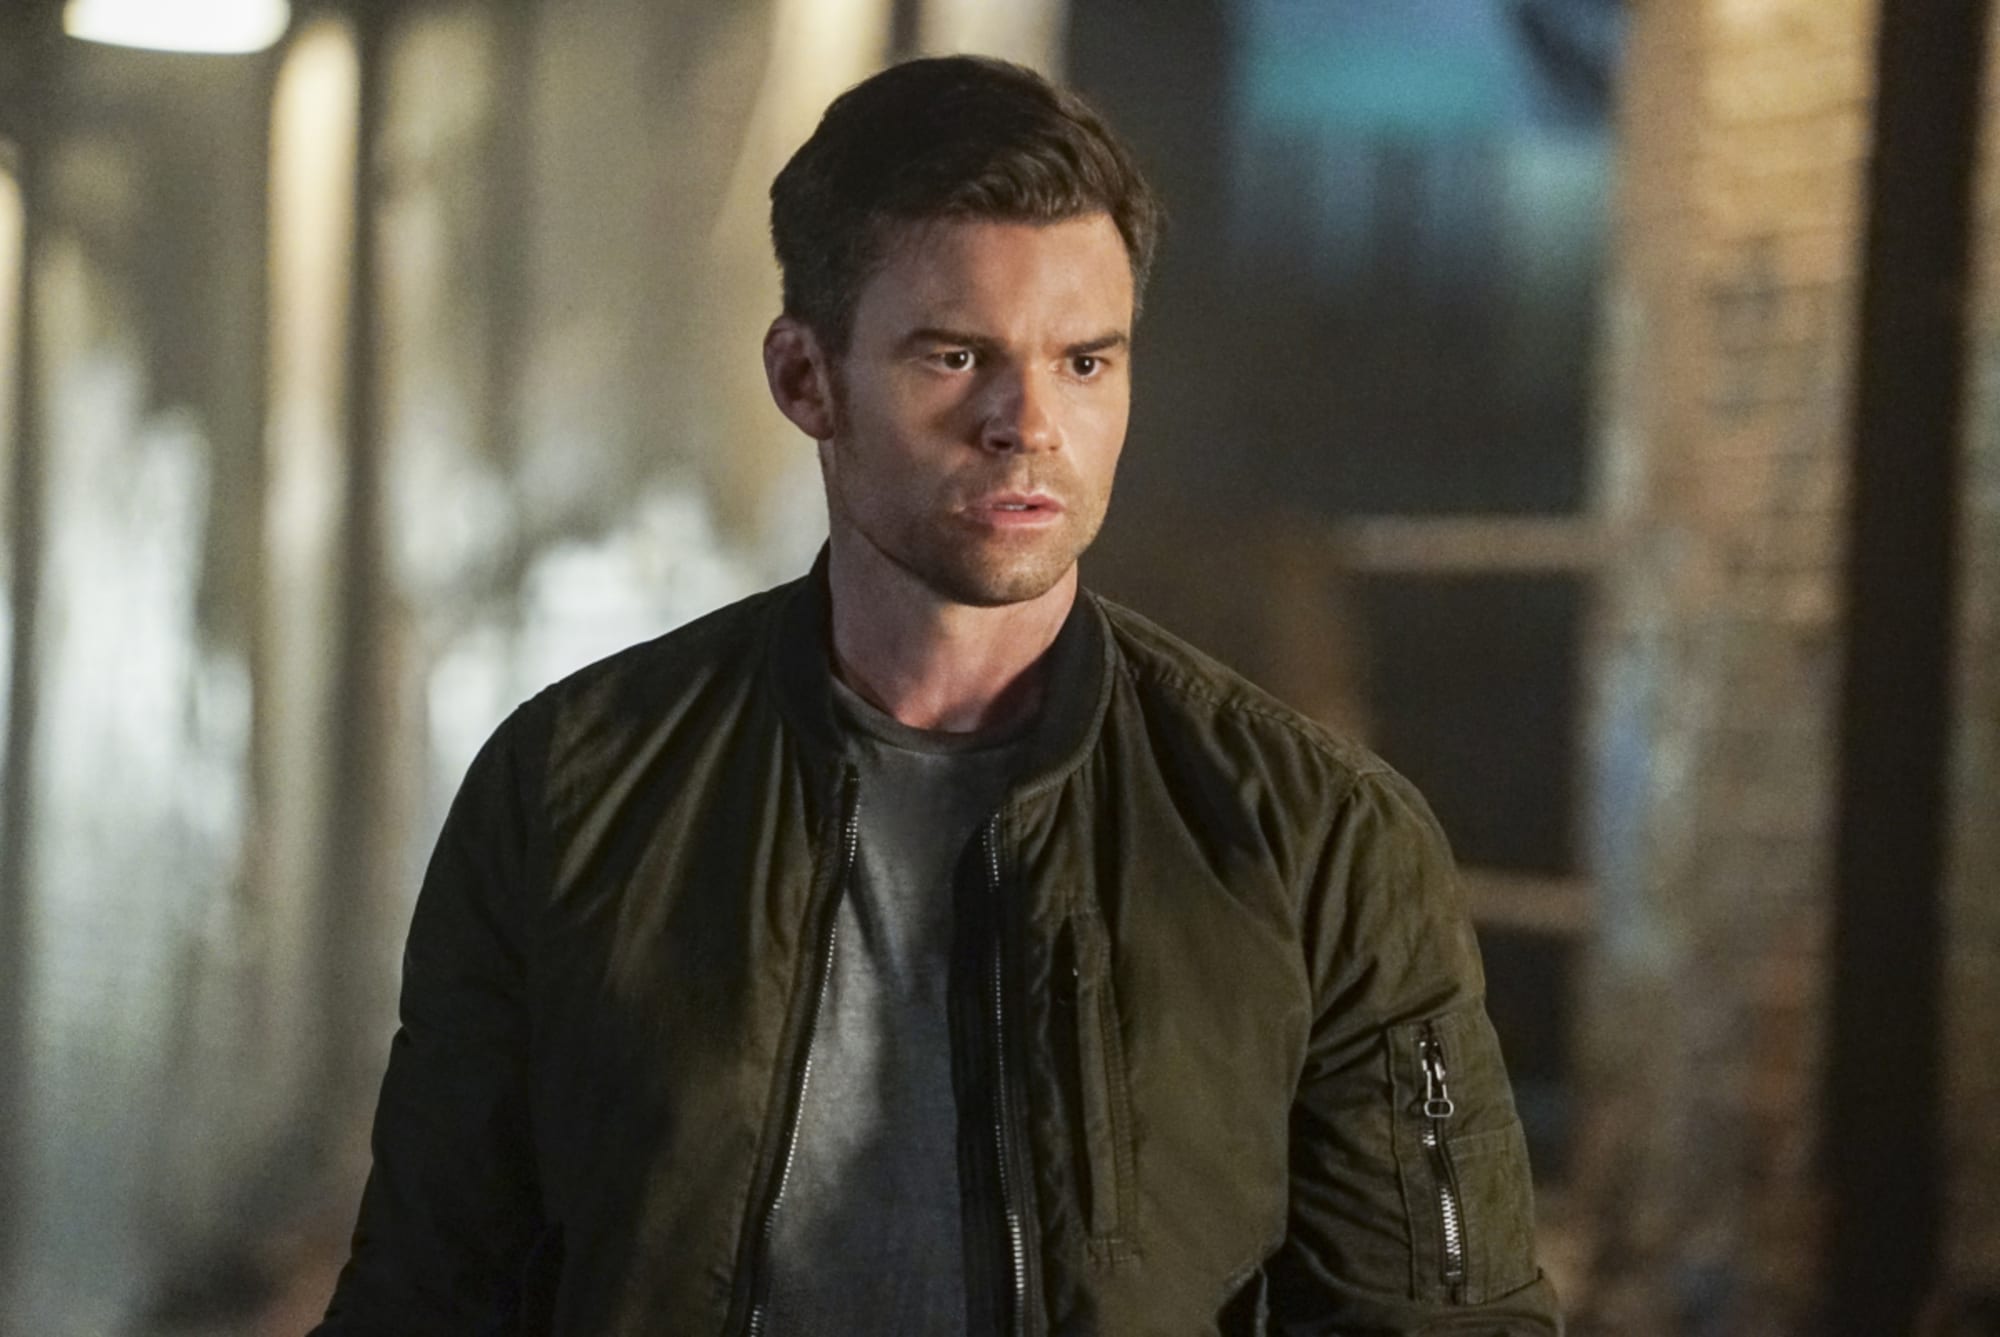 Elijah and Hayley's significance gets lost on Legacies